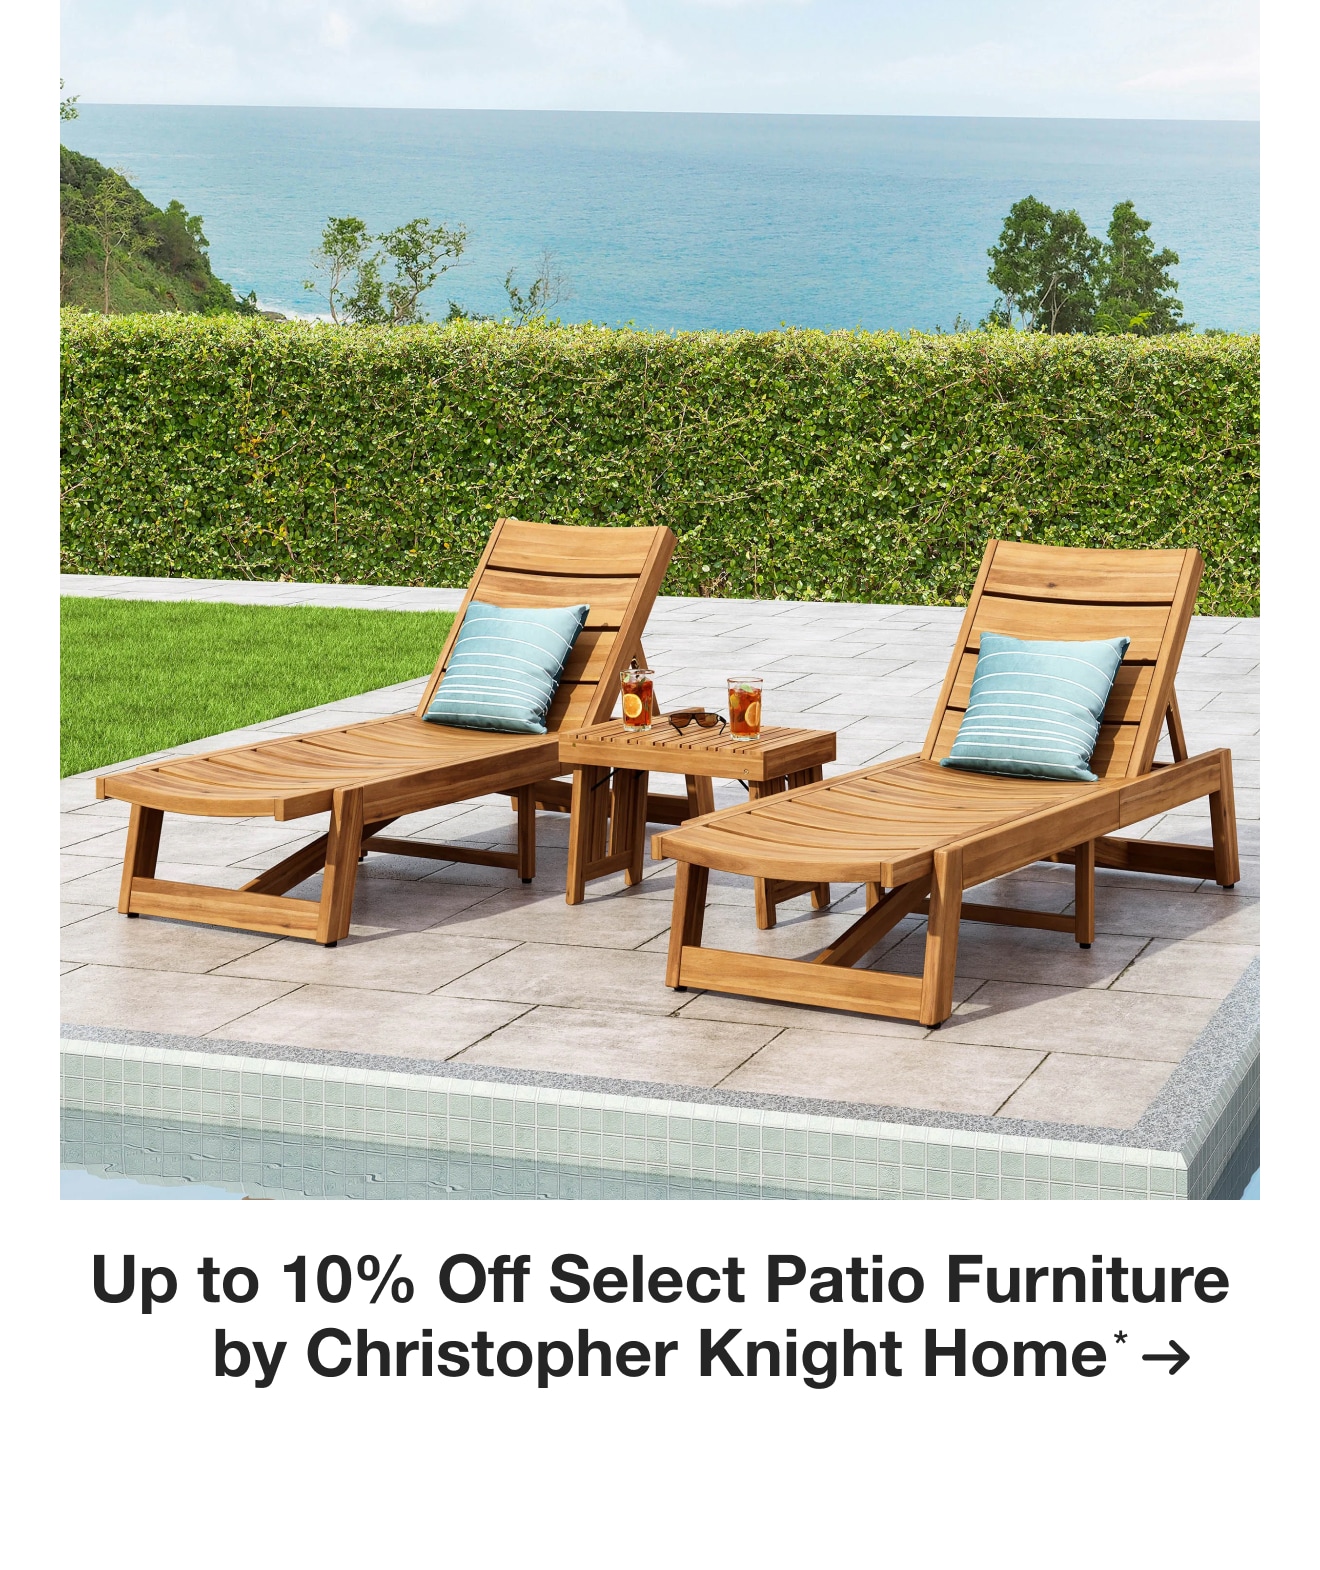 Up to 10% Off Select Furniture by Christopher Knight Home*